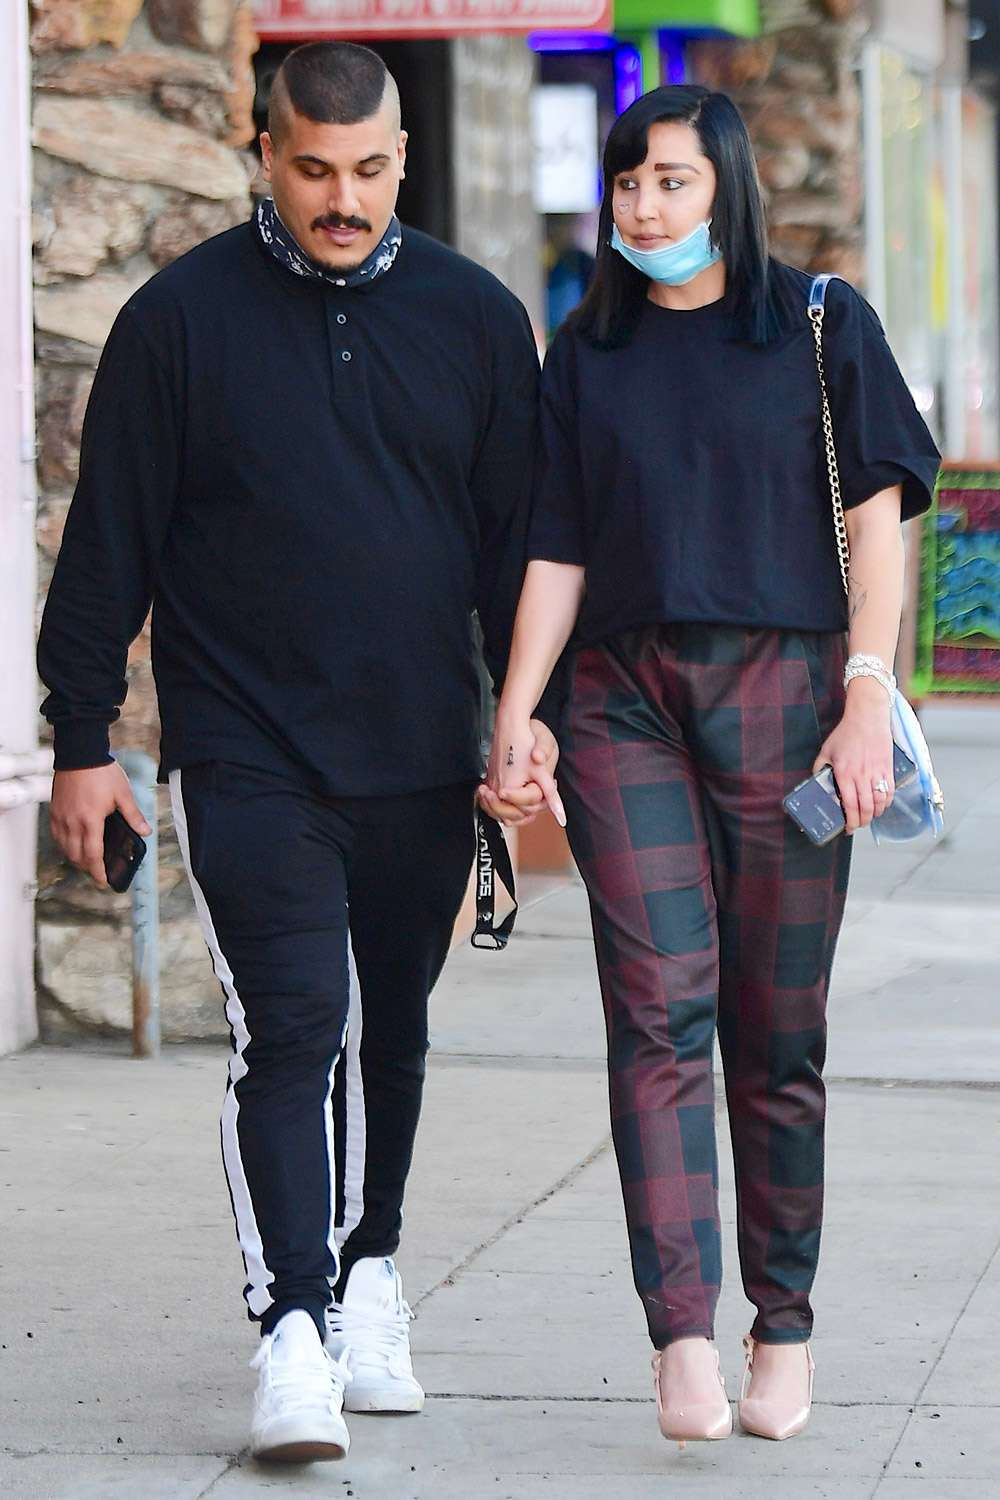 Amanda Bynes walking with her supposed to be husband Paul Michael